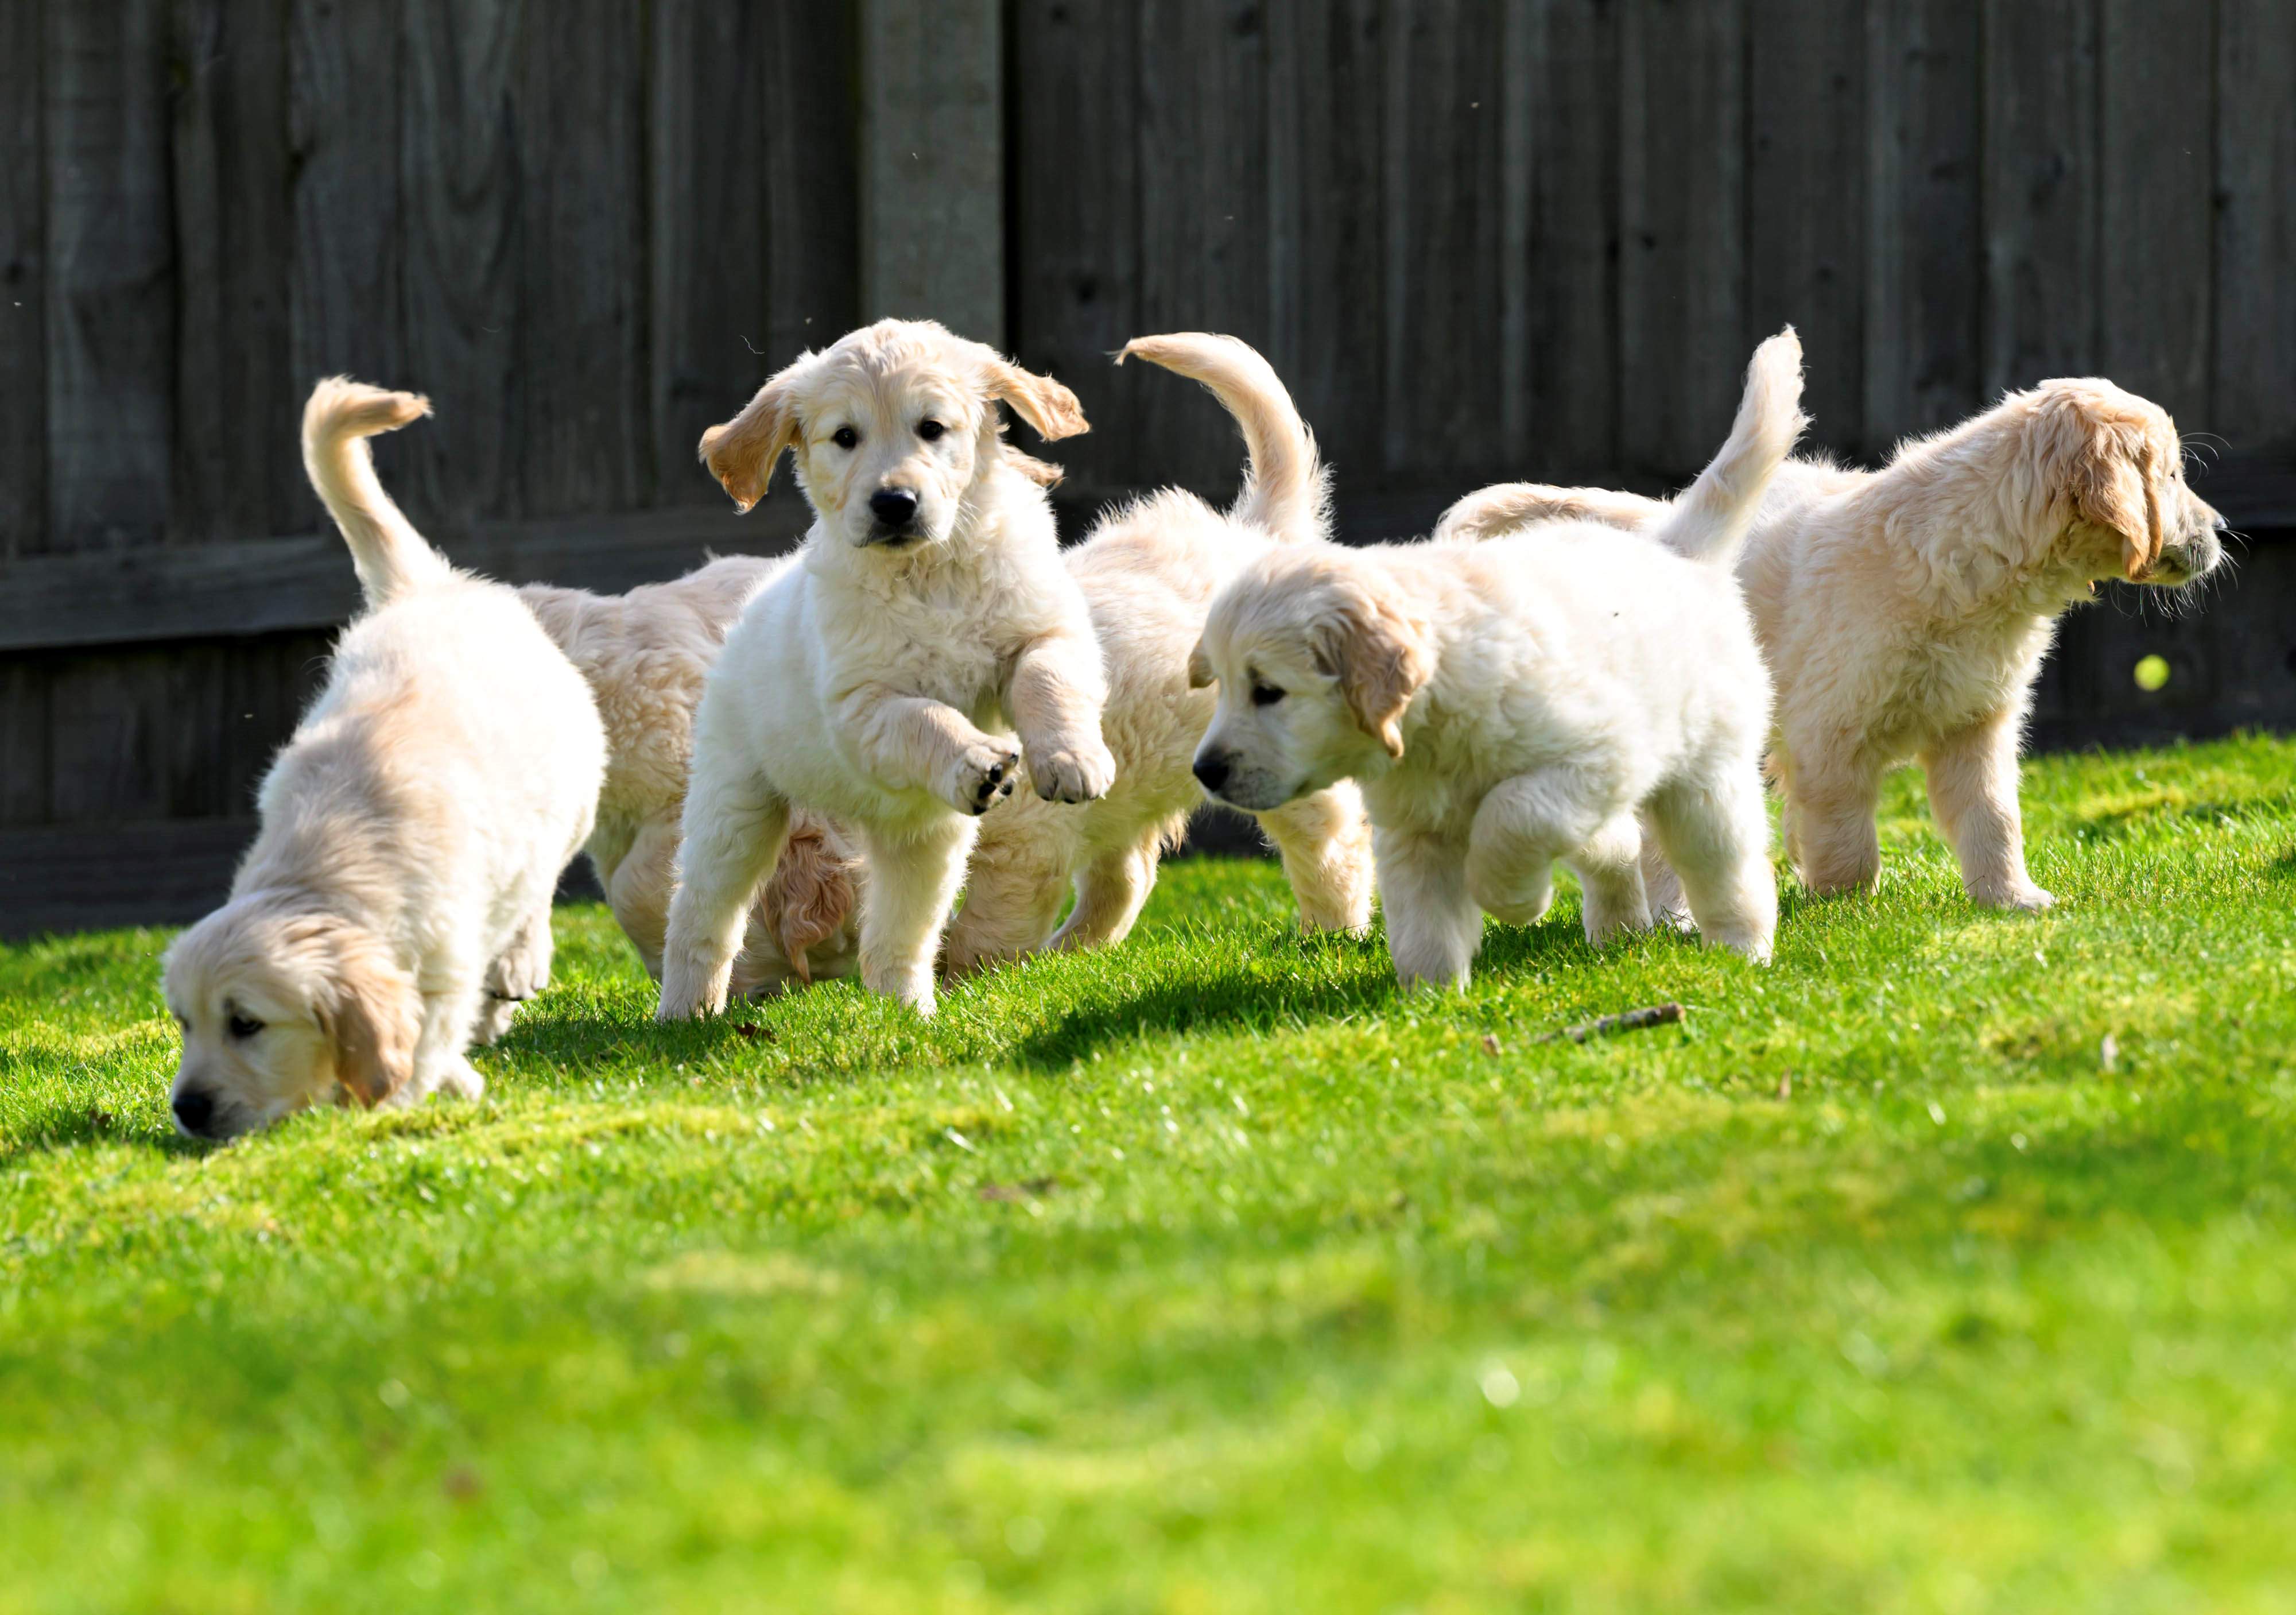 Six golden retriever puppies plays together on the grass at the National Centre's Puppy Block